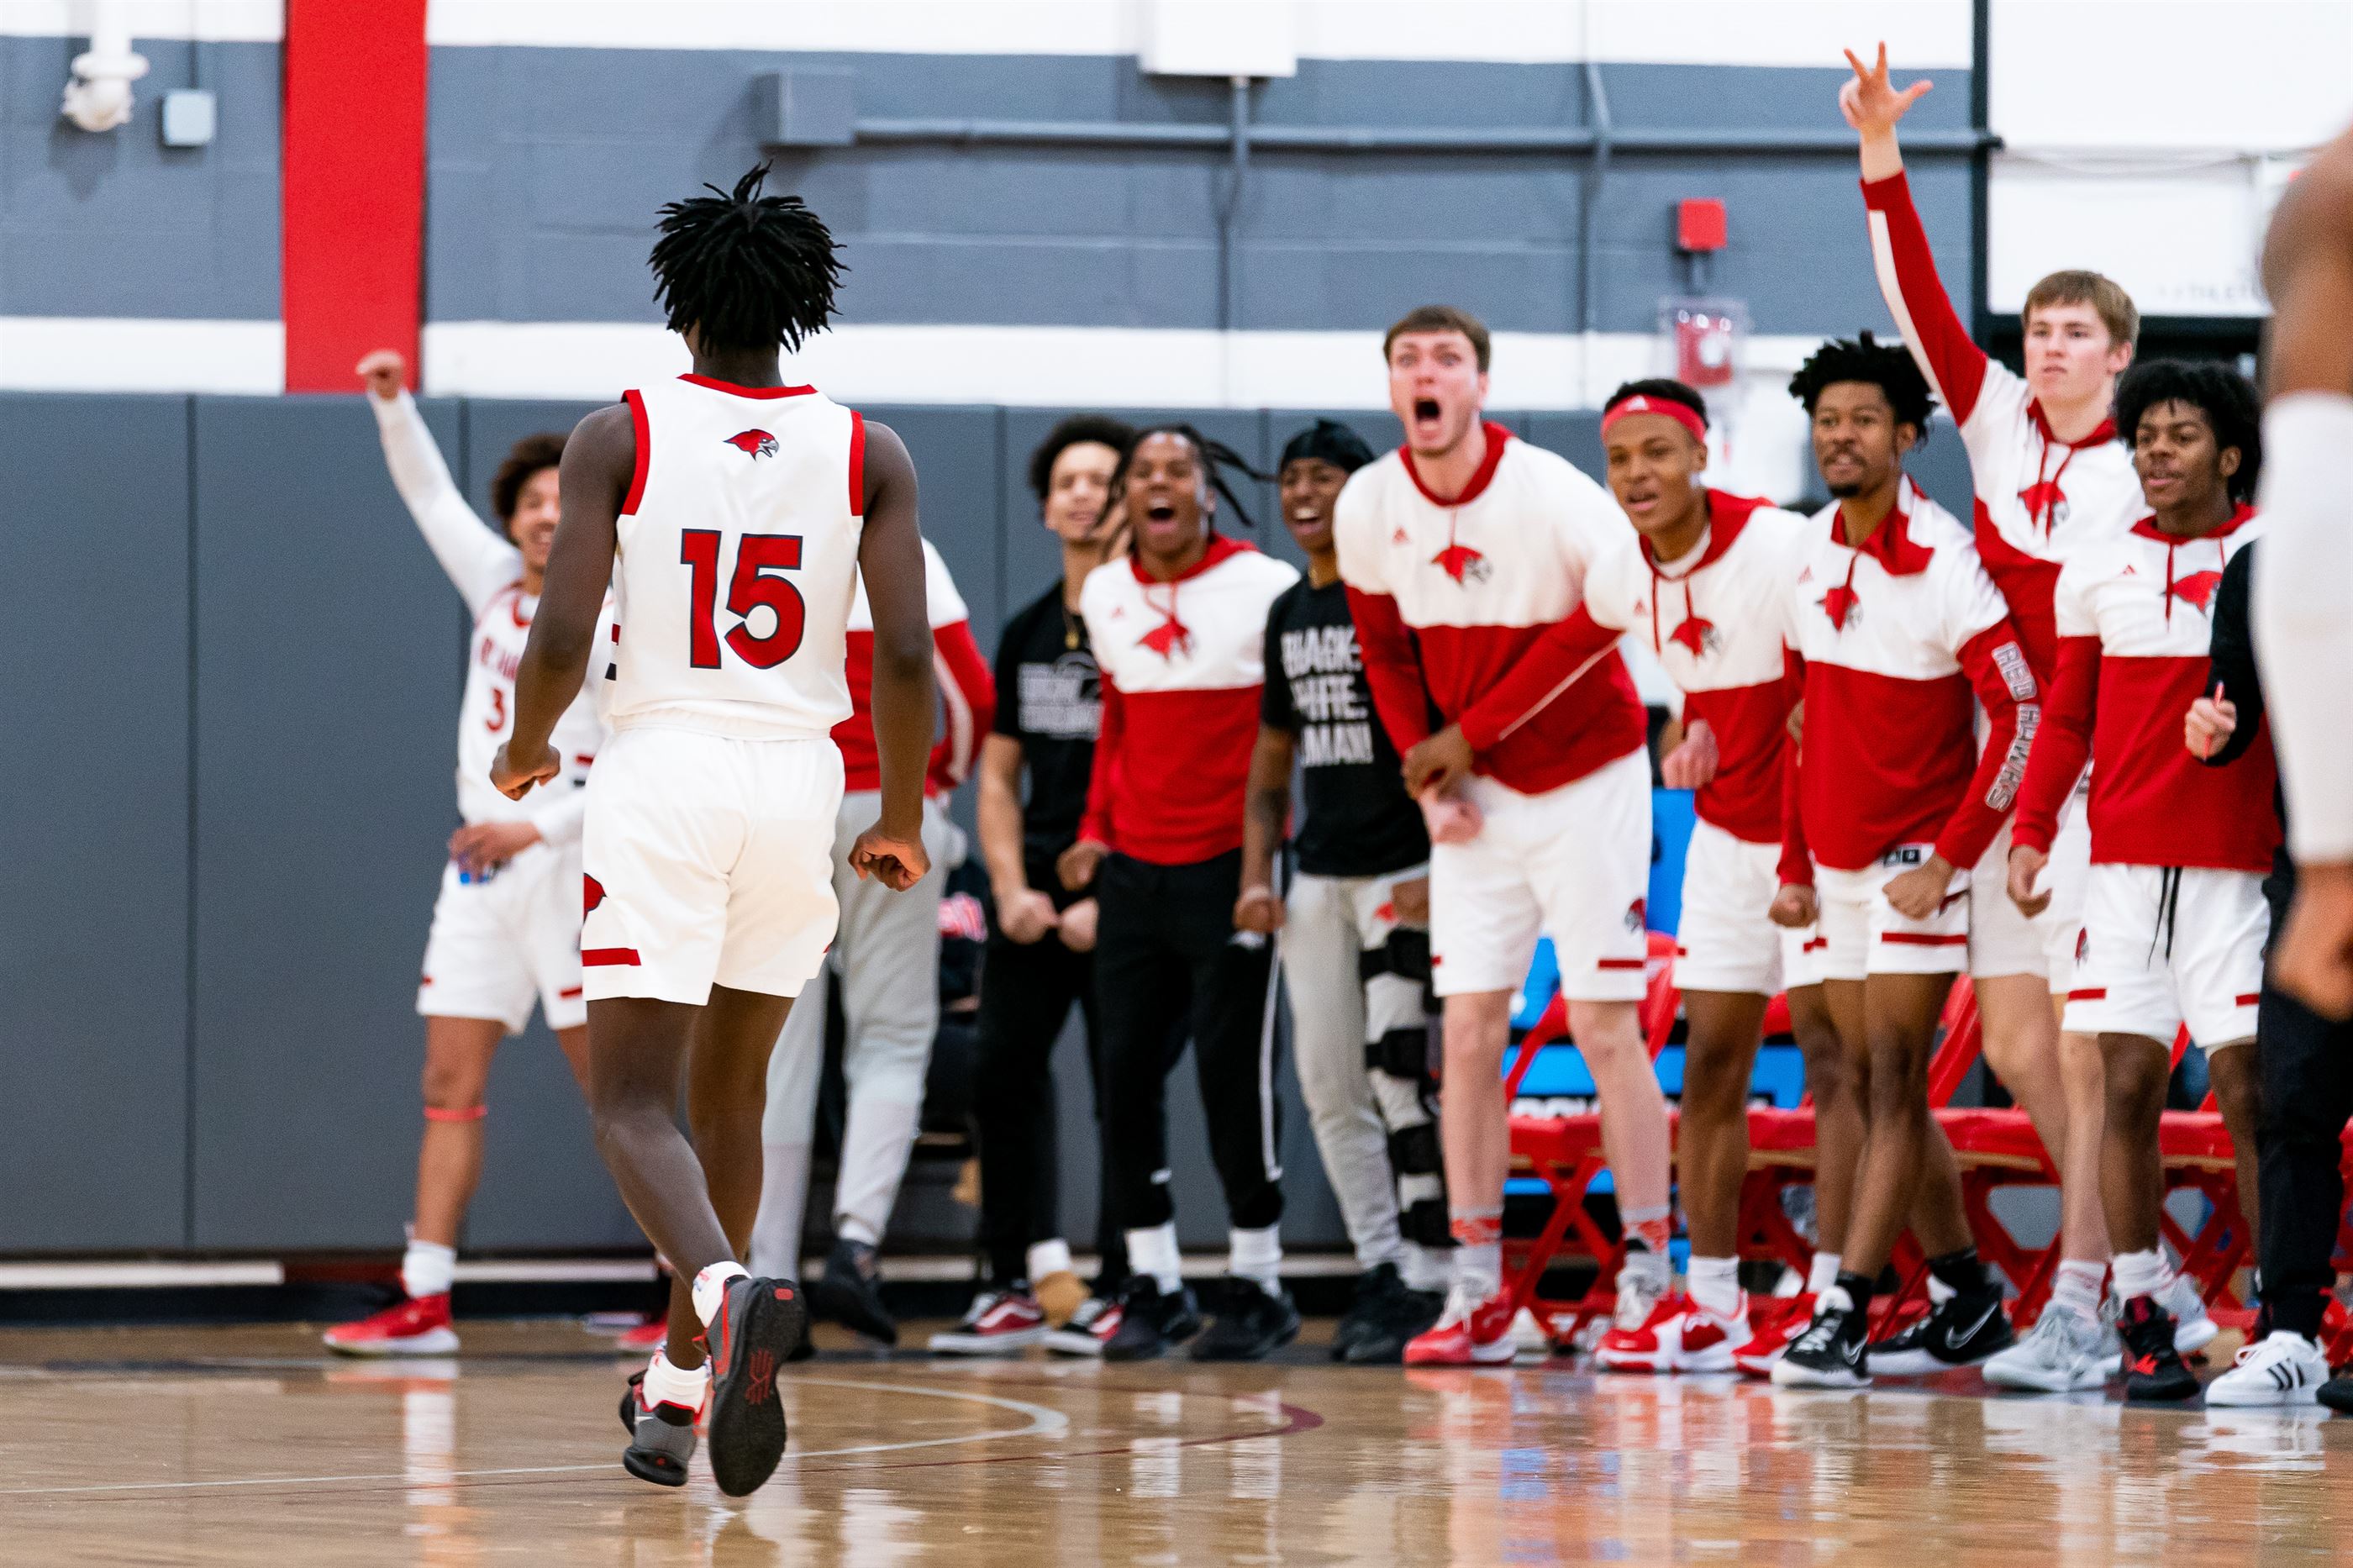 Mike Jackson is hyped up by his teammates after a big basket.